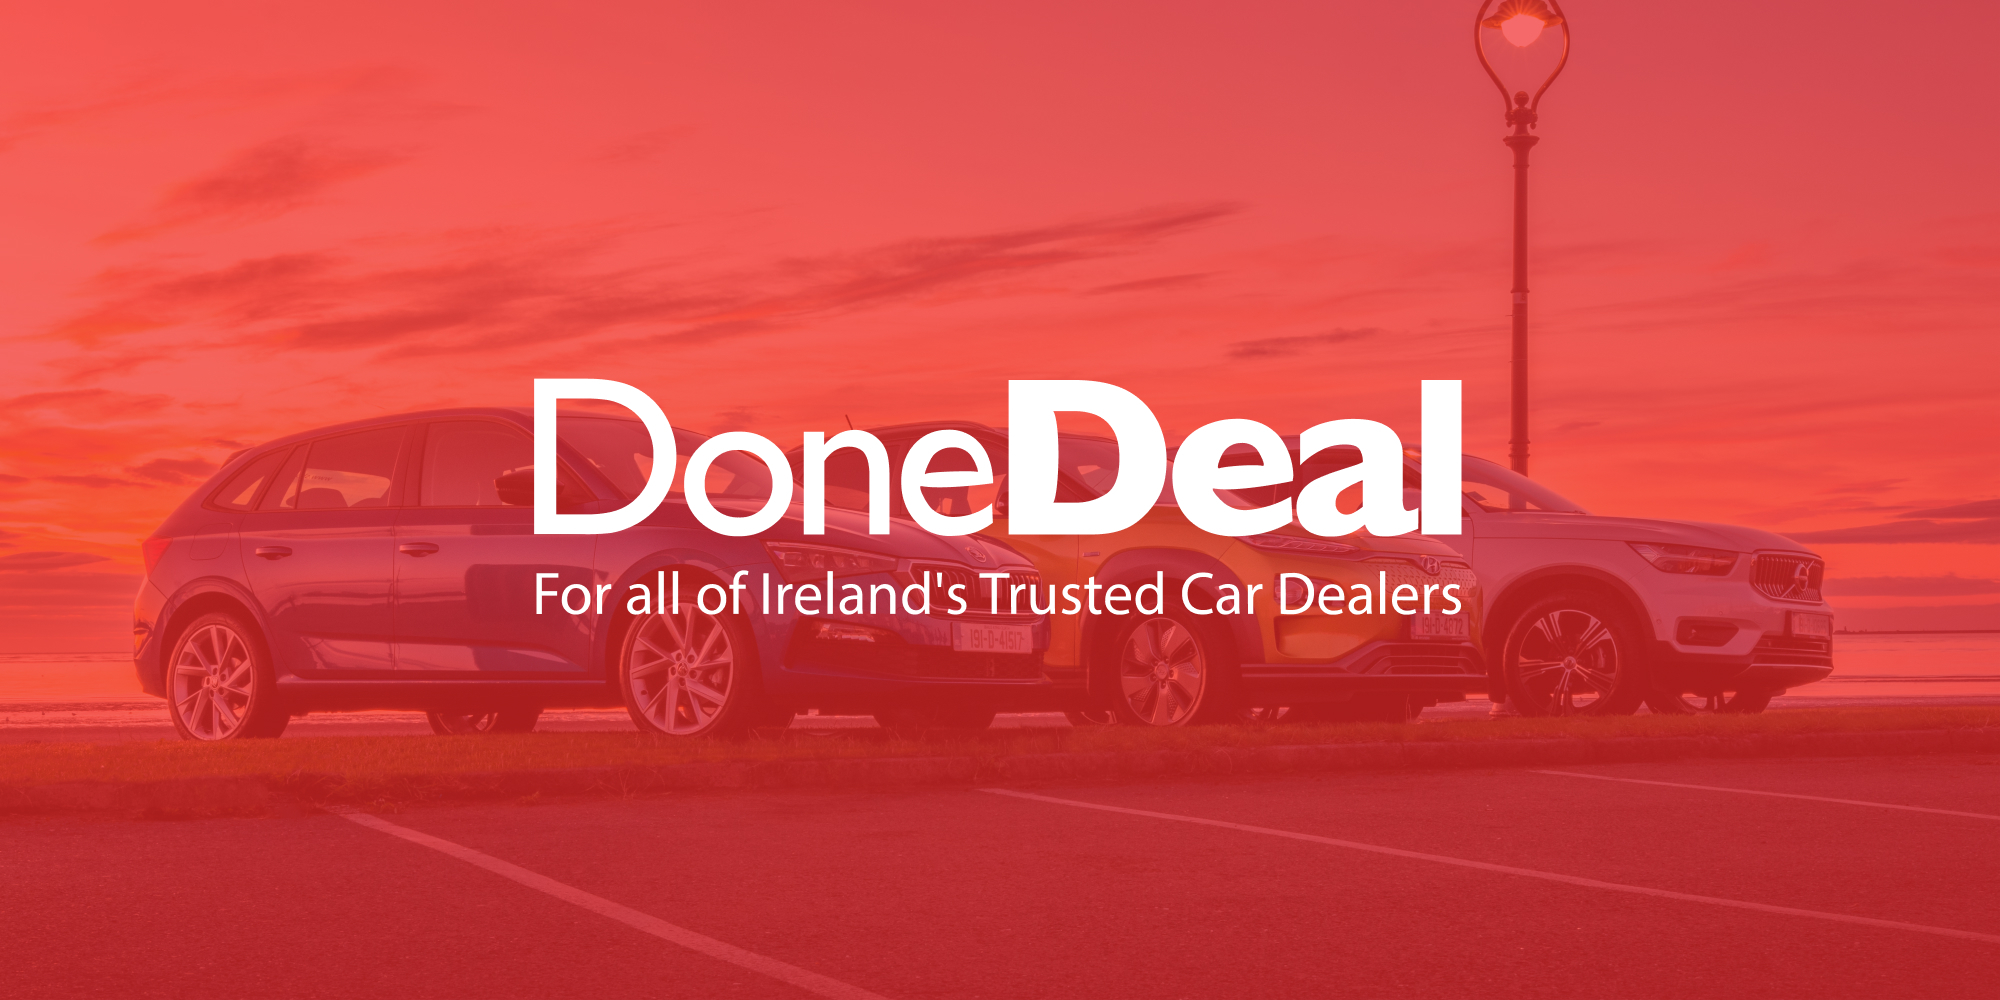 www.donedeal.ie